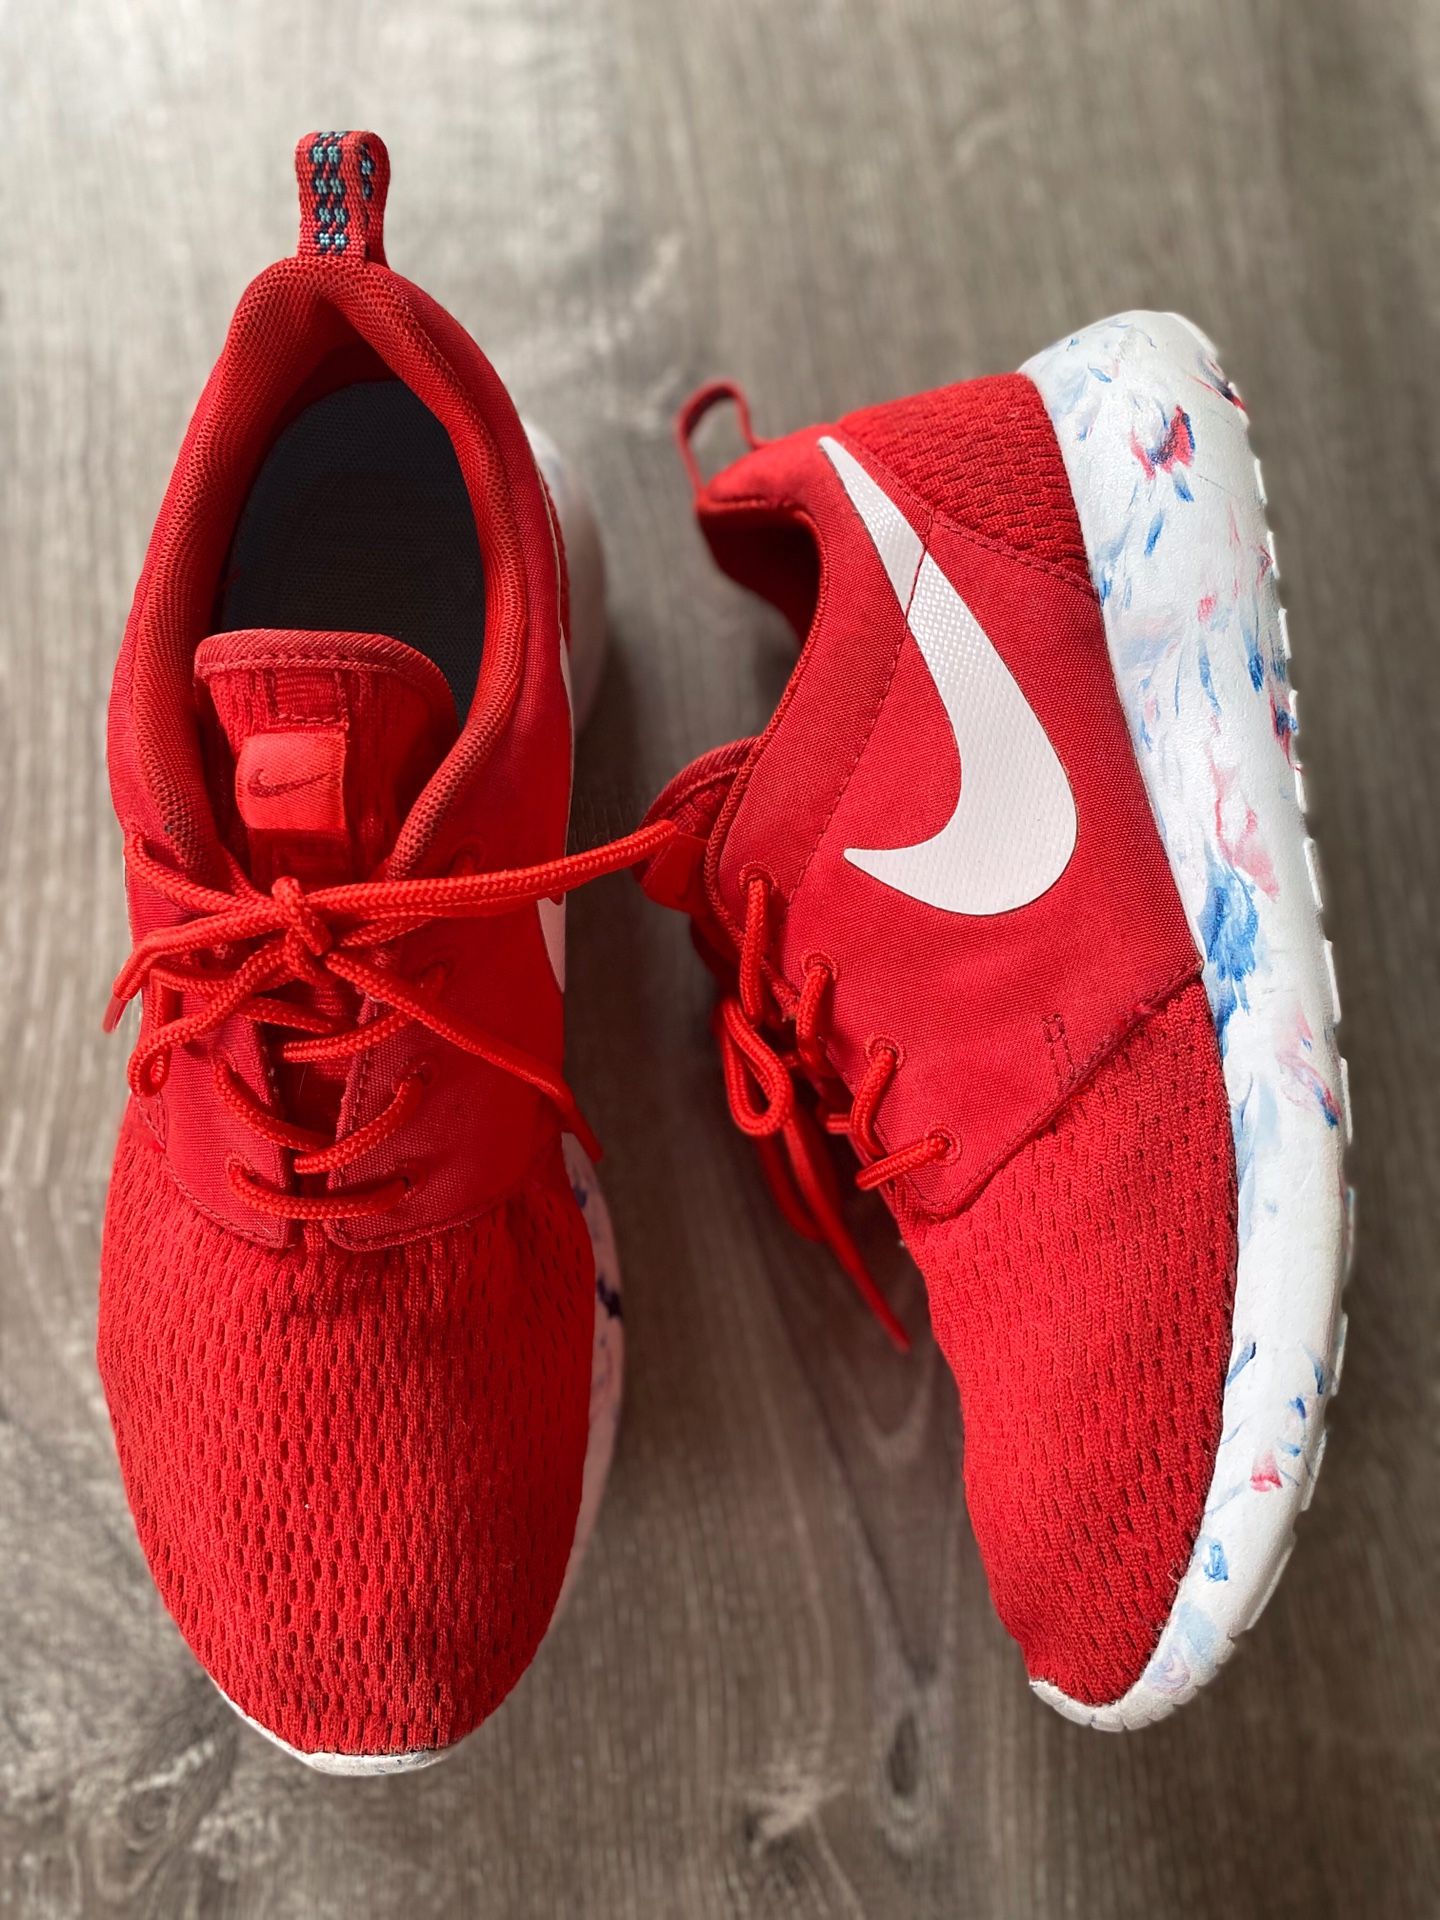 Roshe Nike’s red white blue men’s size 6 running shoes light weight limited edition